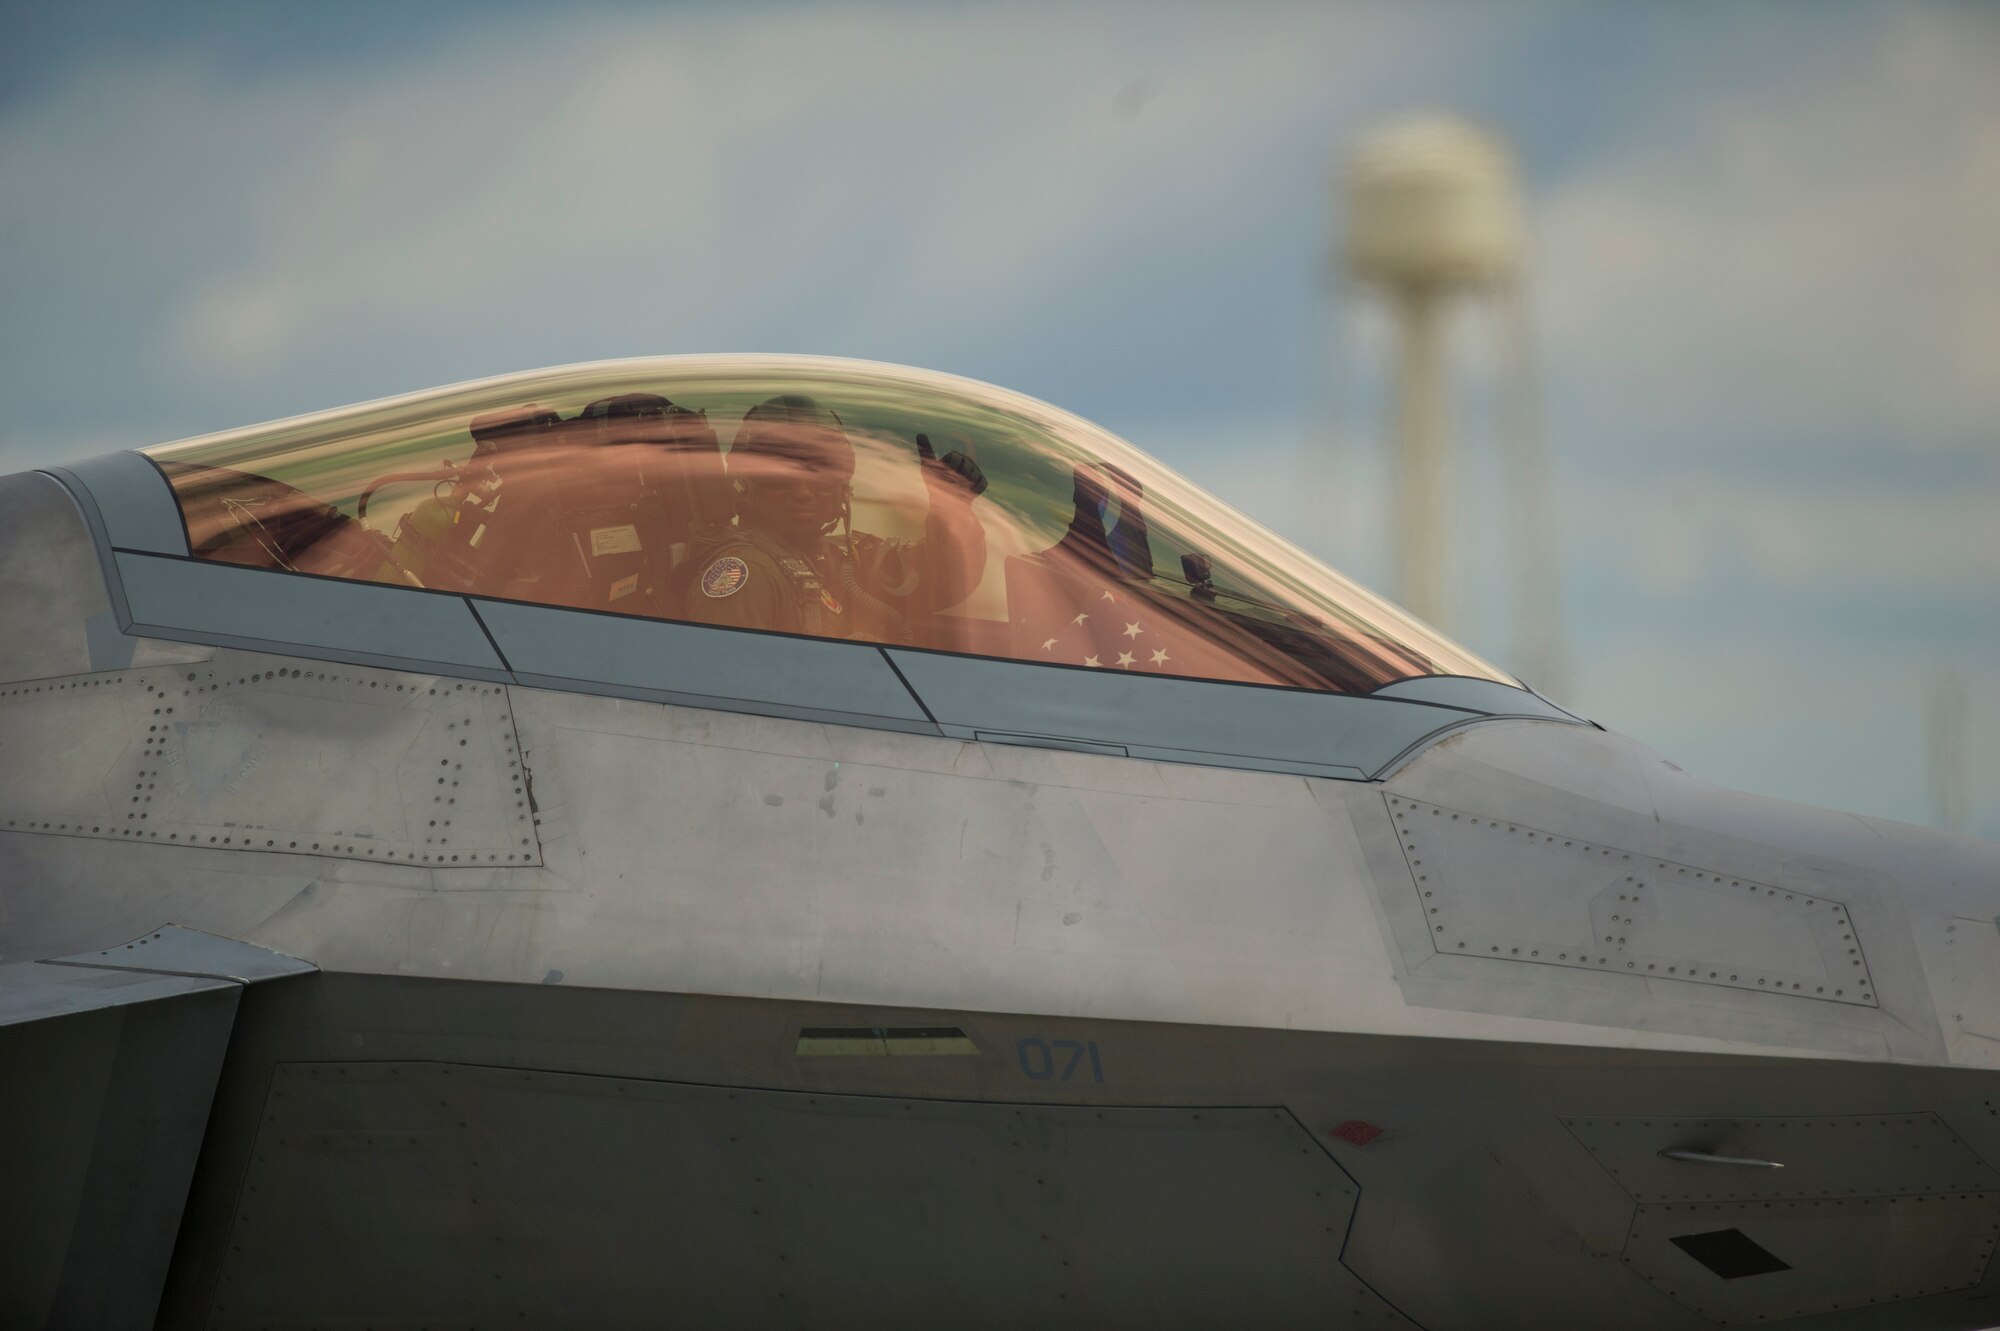 U.S. Air Force Maj. Paul "Loco" Lopez, F-22 Raptor Demo Team Pilot, gives a thumbs-up before take-off at the 2019 Skyfest Skyfest Open House and Air Show at Fairchild Air Force Base, Washington, June 22, 2019. Skyfest 2019 offered a unique view of Team Fairchild’s role in enabling Rapid Global Mobility for the U.S. Air Force. The show featured more than 13 aerial acts and 16 static display aircraft, as well as other attractions and displays. (U.S. Air Force photo by Senior Airman Ryan Lackey)